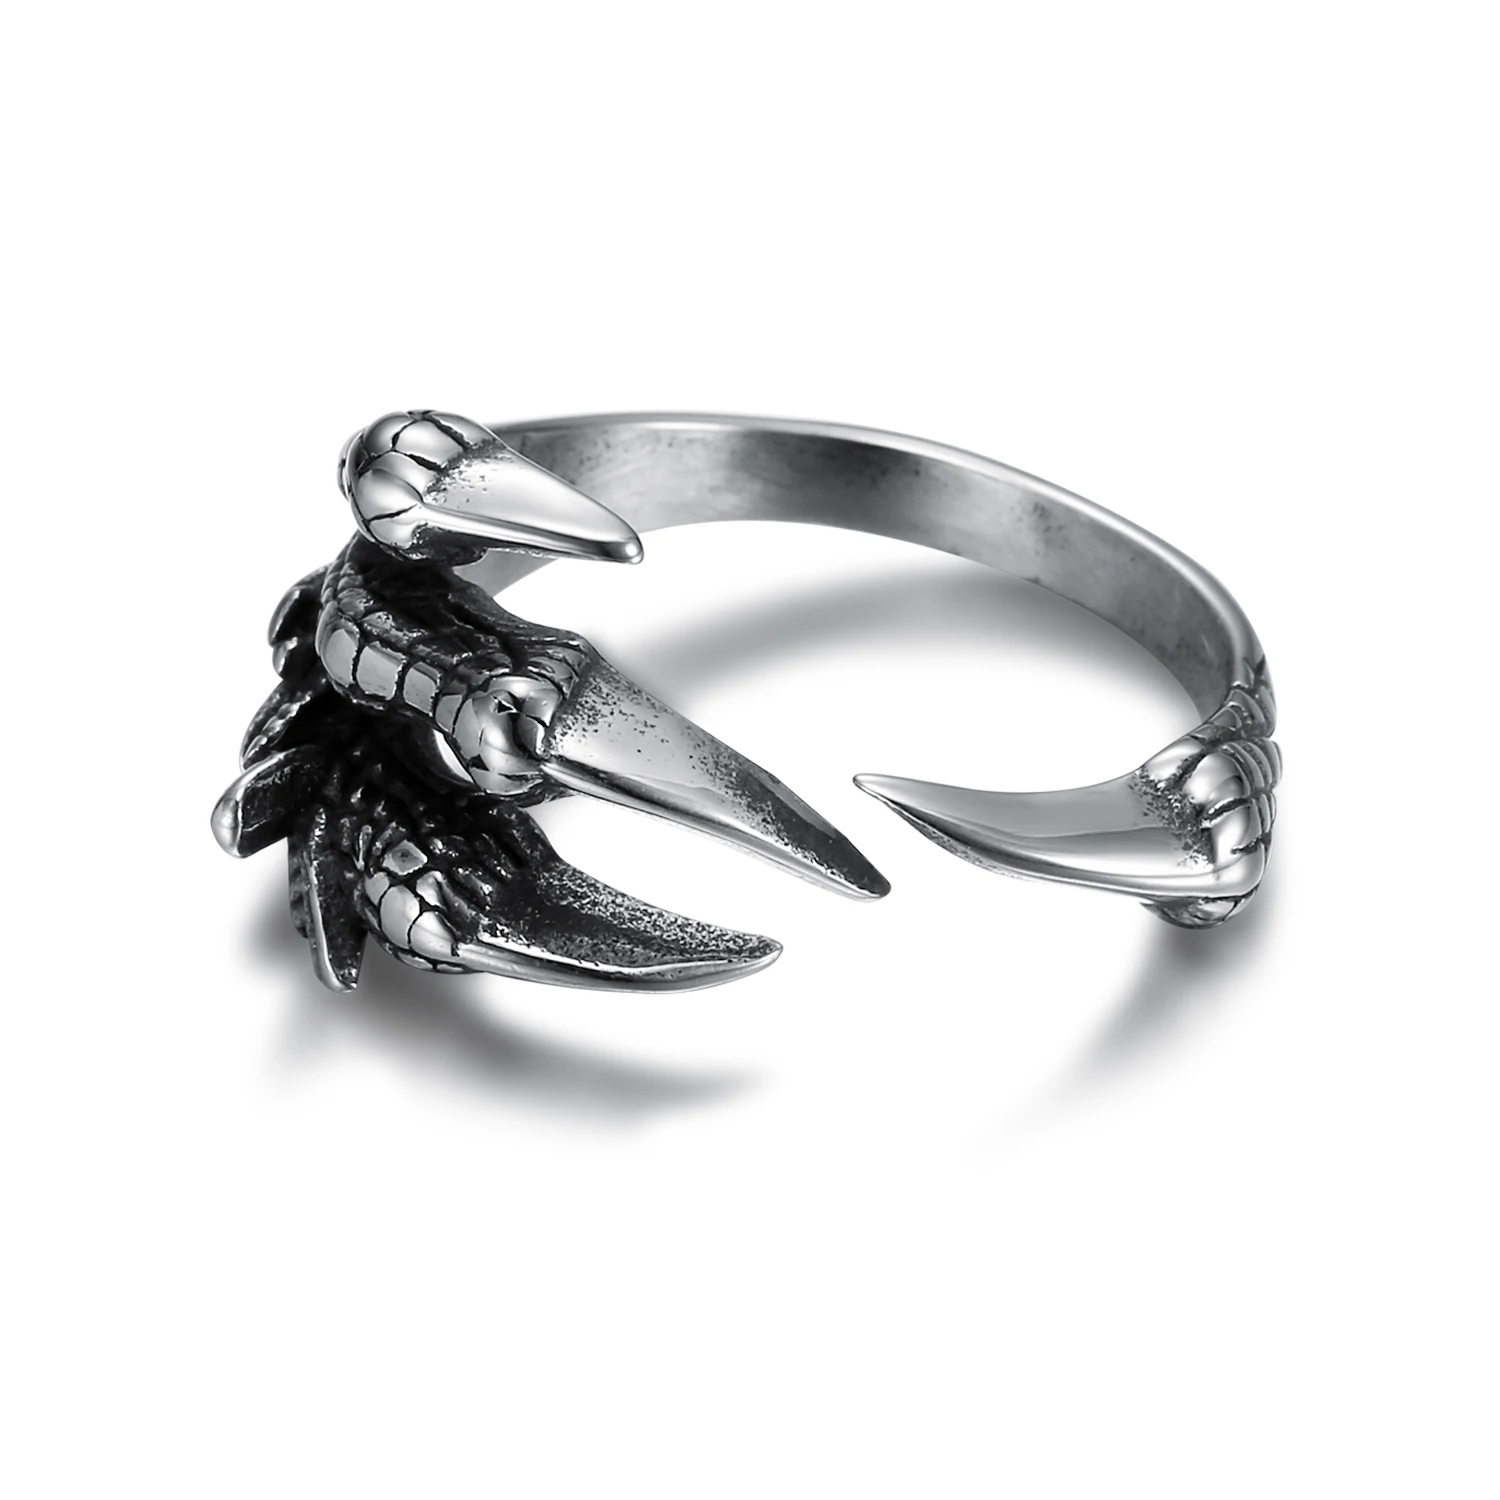 

Adjustable Vintage Punk Gothic Jewelry Ring 316 Stainless Steel Dragon Eagle Claw Finger Rings for Men Women